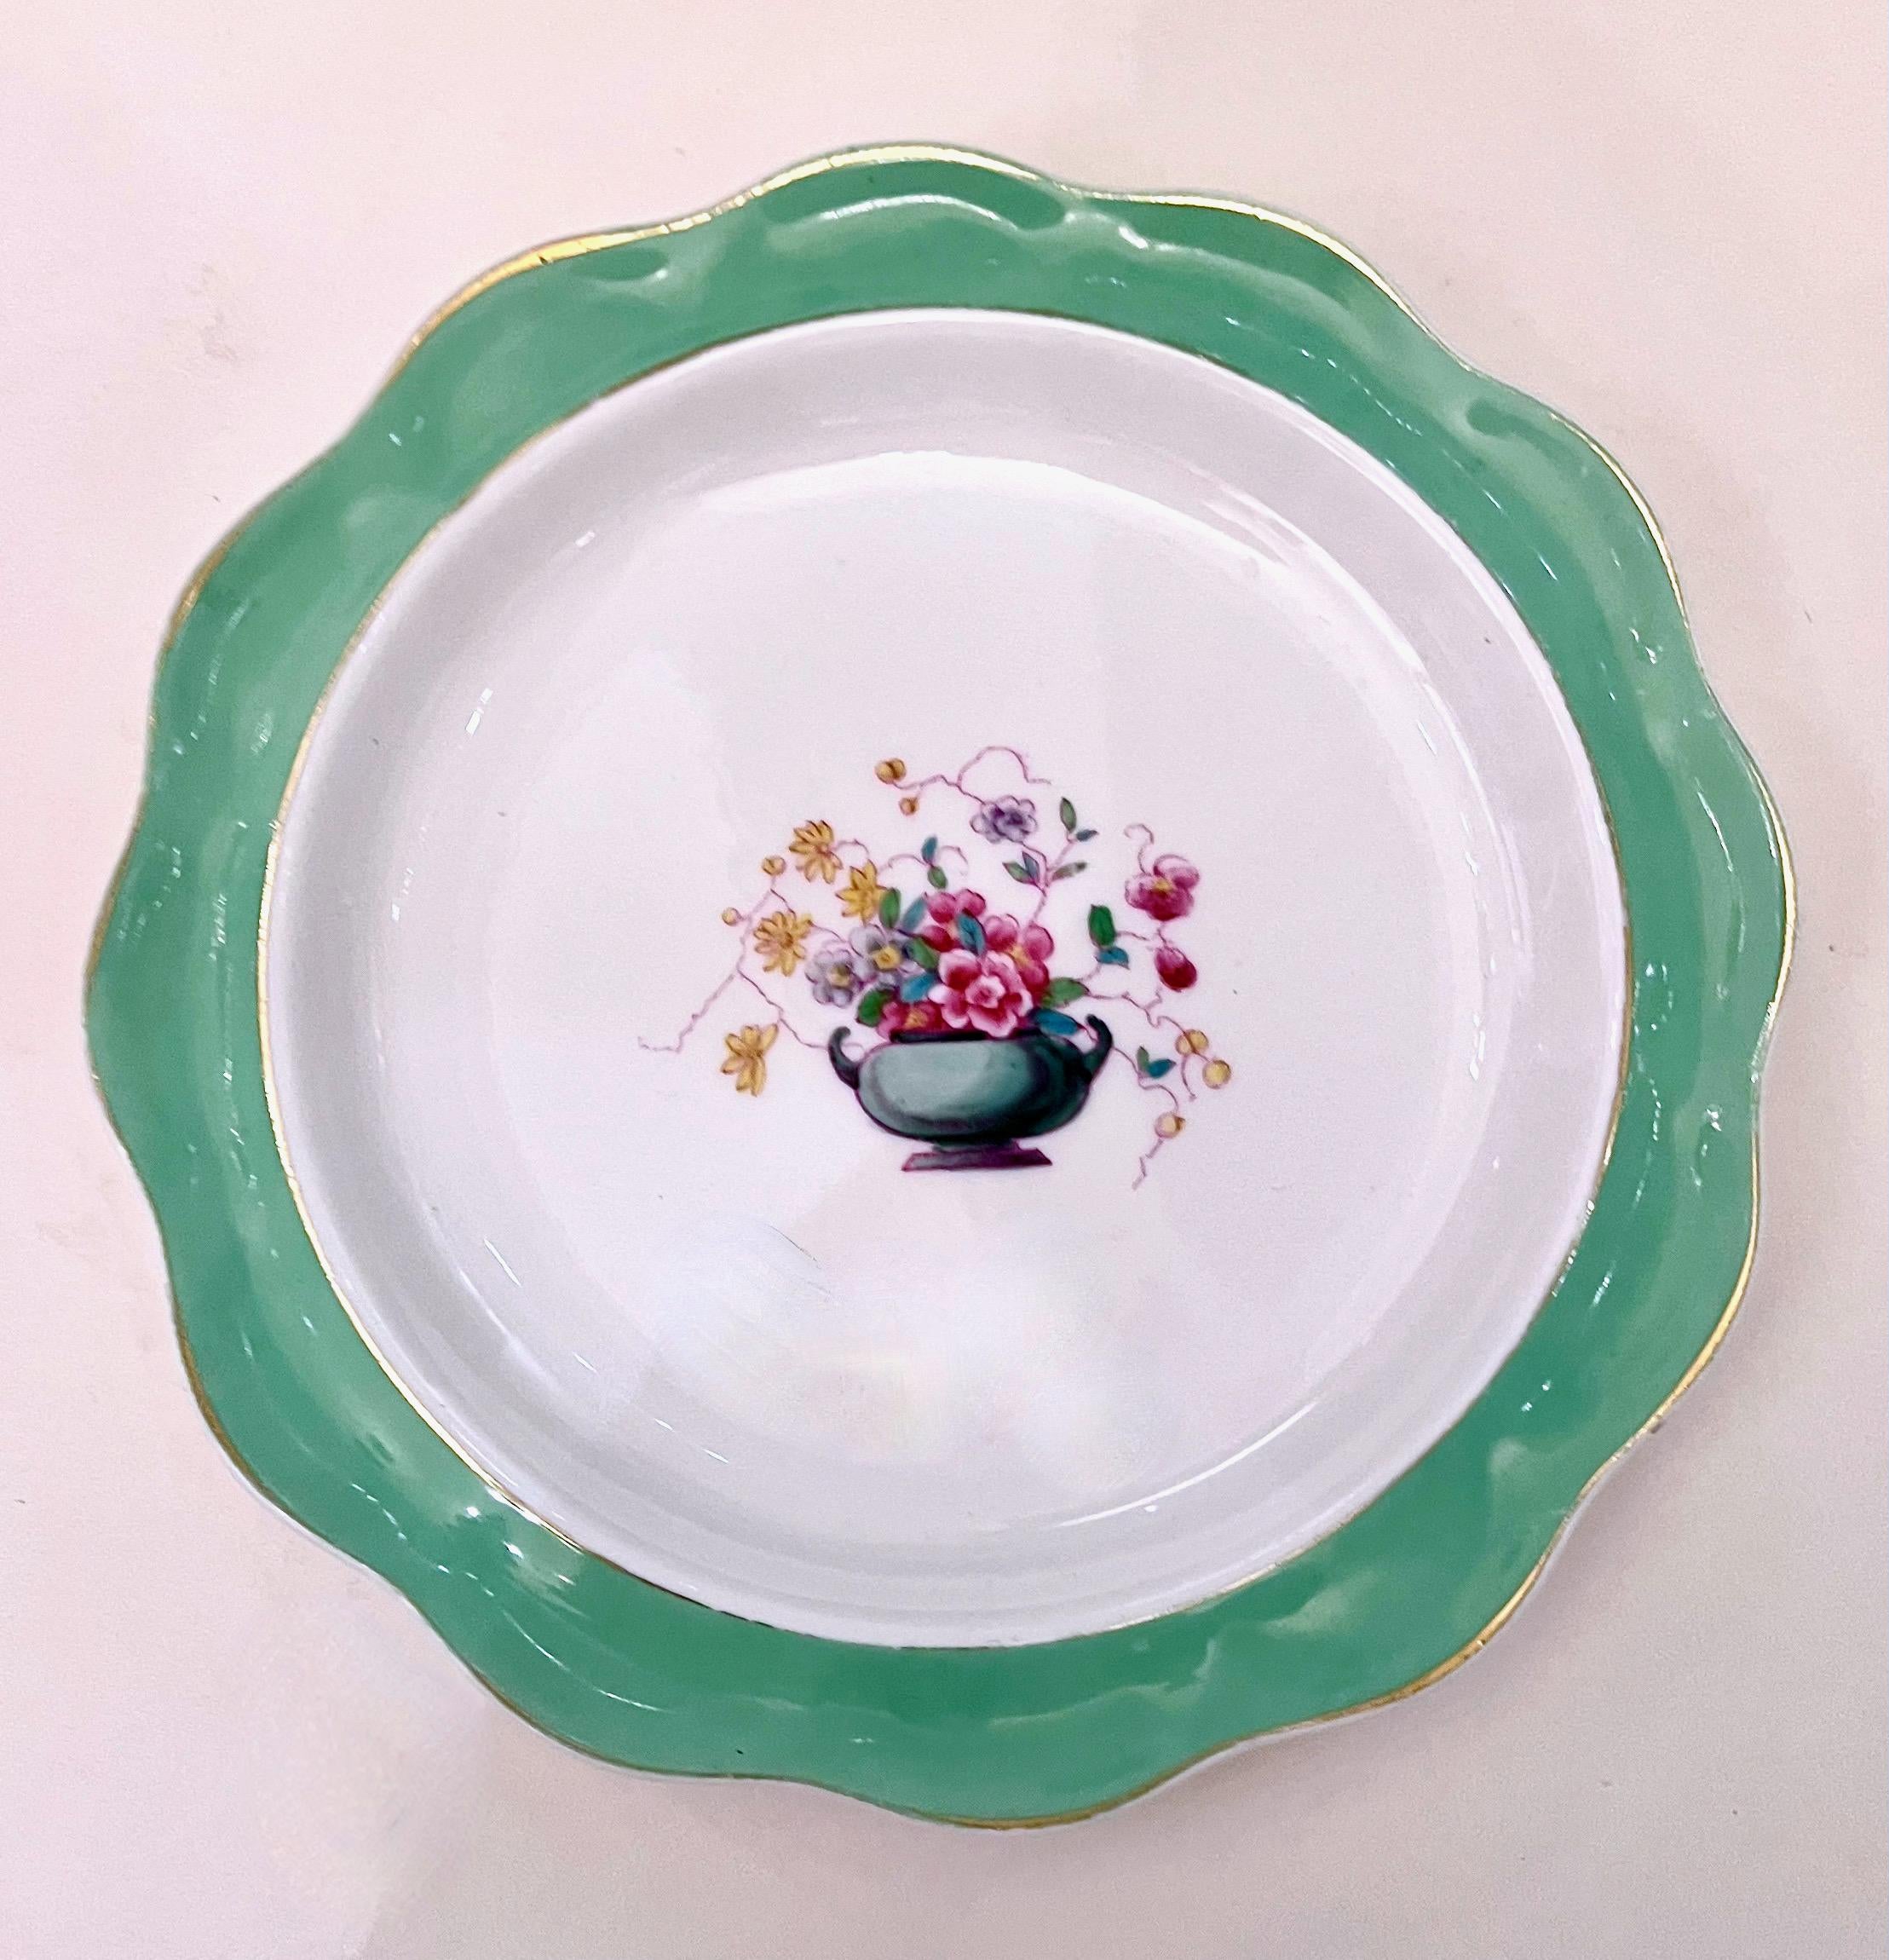 This is a charming set of 14 Royal Doulton hand painted luncheon plates that date to the early 20th century. The scolloped rims of the plates are decorated with a beautiful hand-painted band of subtle turquoise and a hand-painted floral spray in an